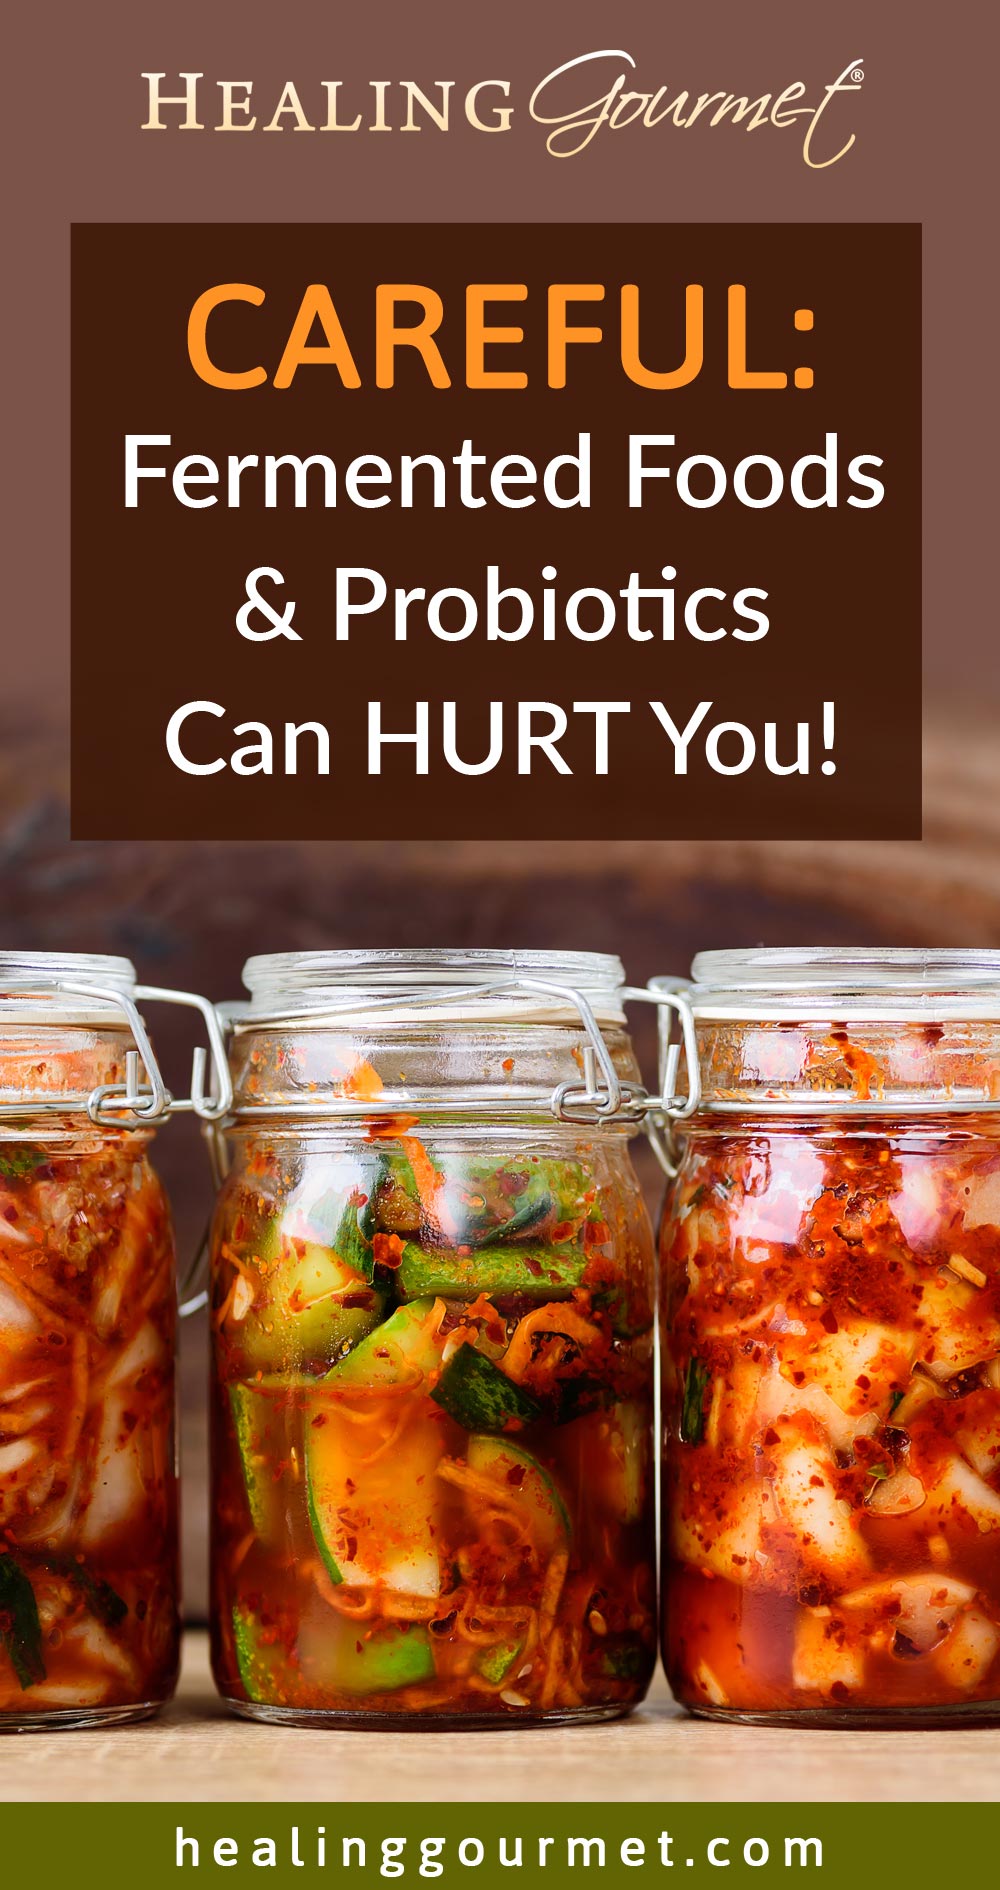 When Fermented Foods and Probiotics Hurt